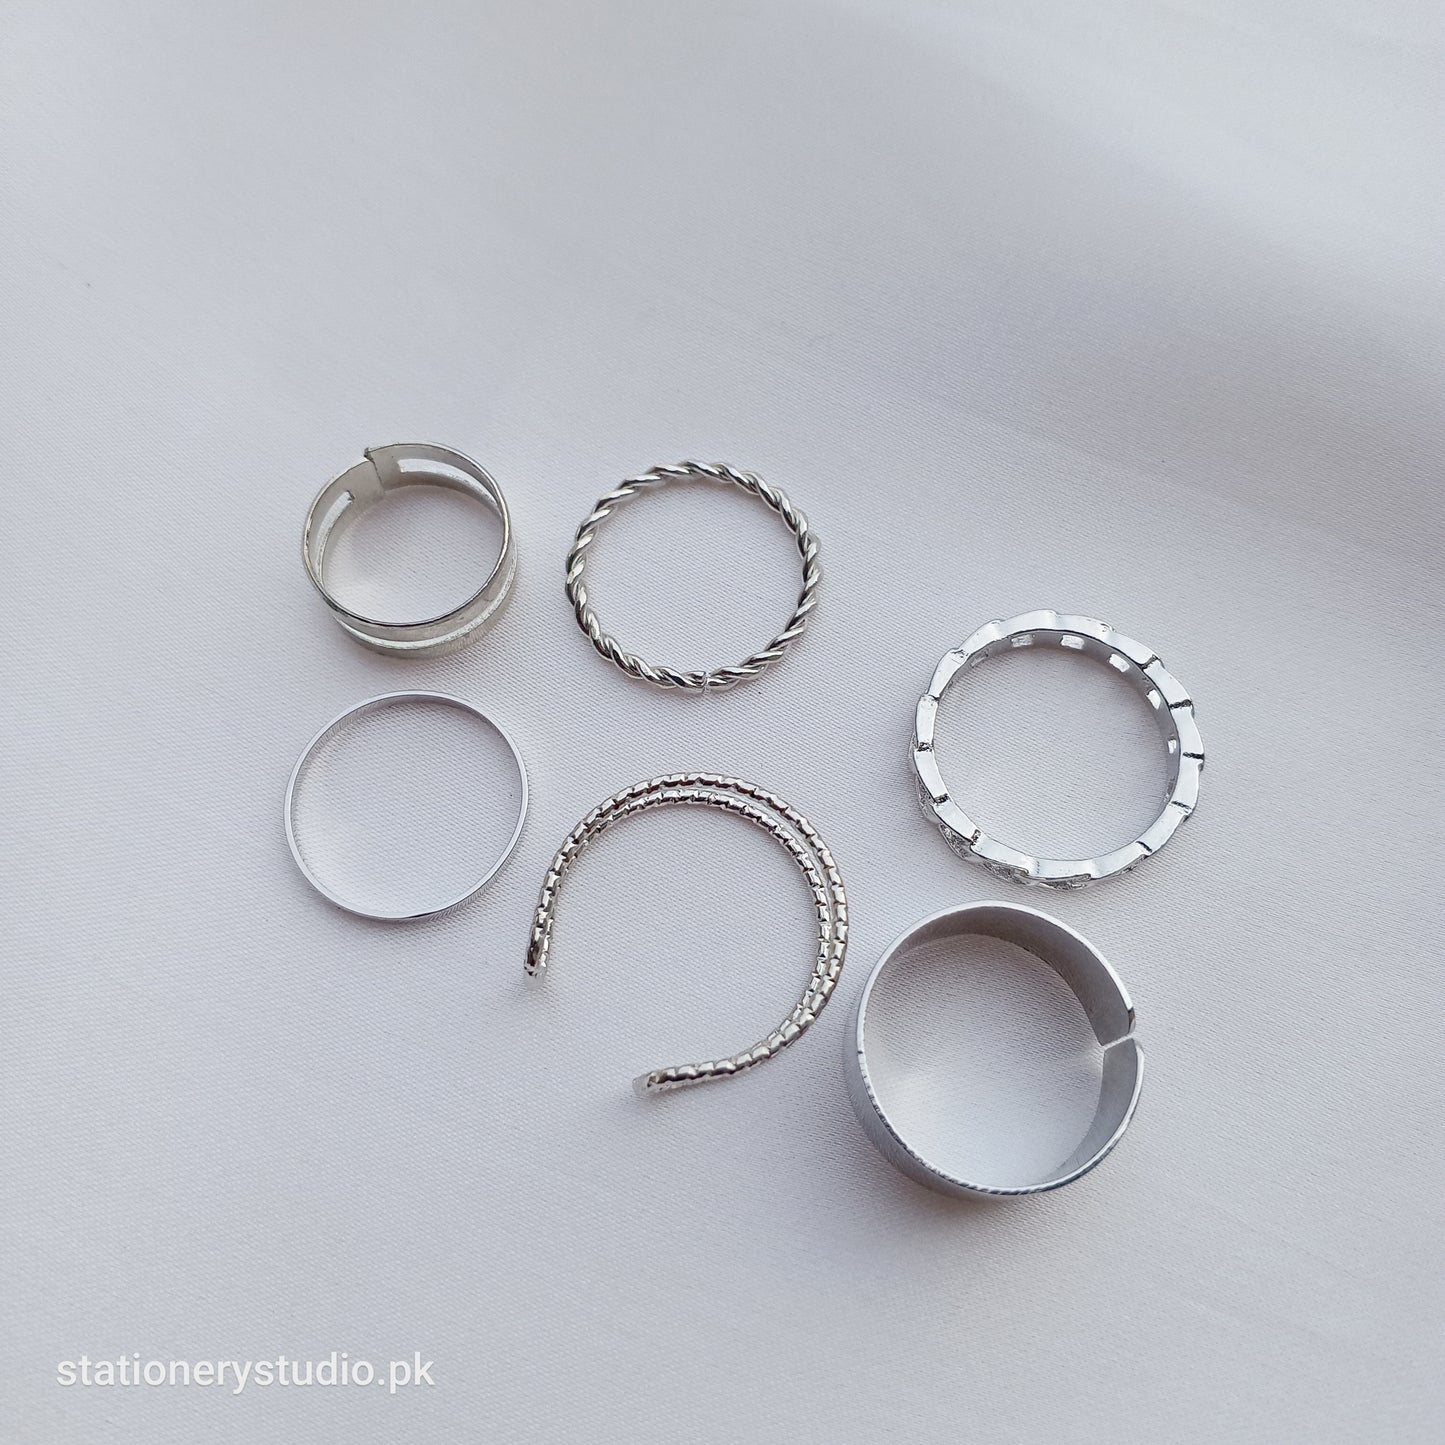 SILVER - RINGS SET OF 6 (STYLE 2)